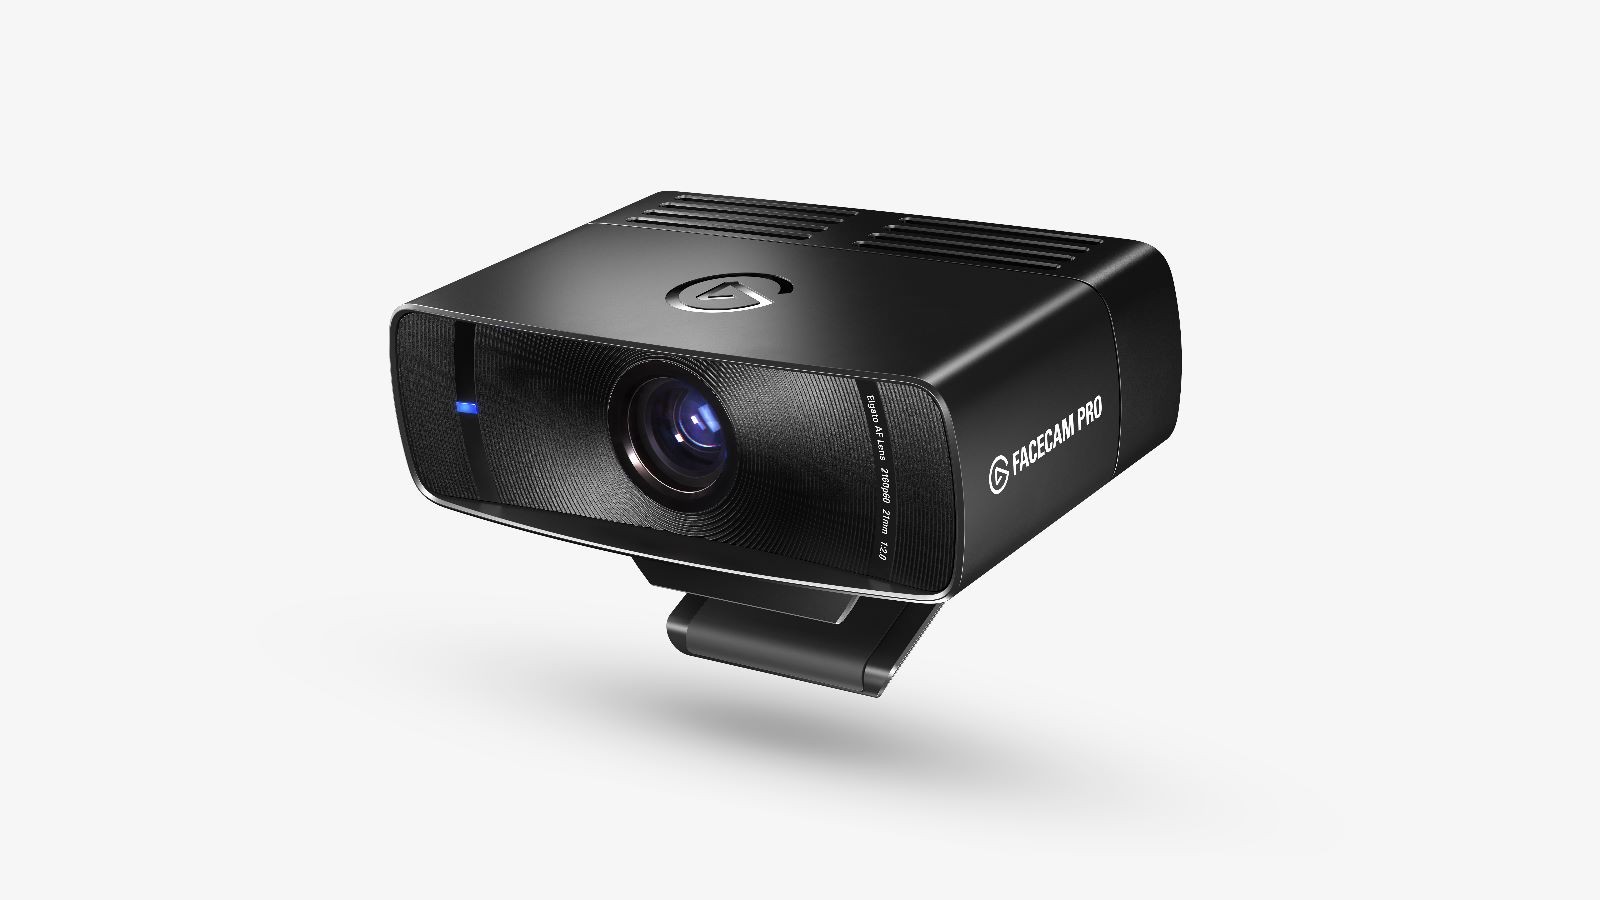 Elgato Facecam Pro: here is the first 4K60 webcam in the world